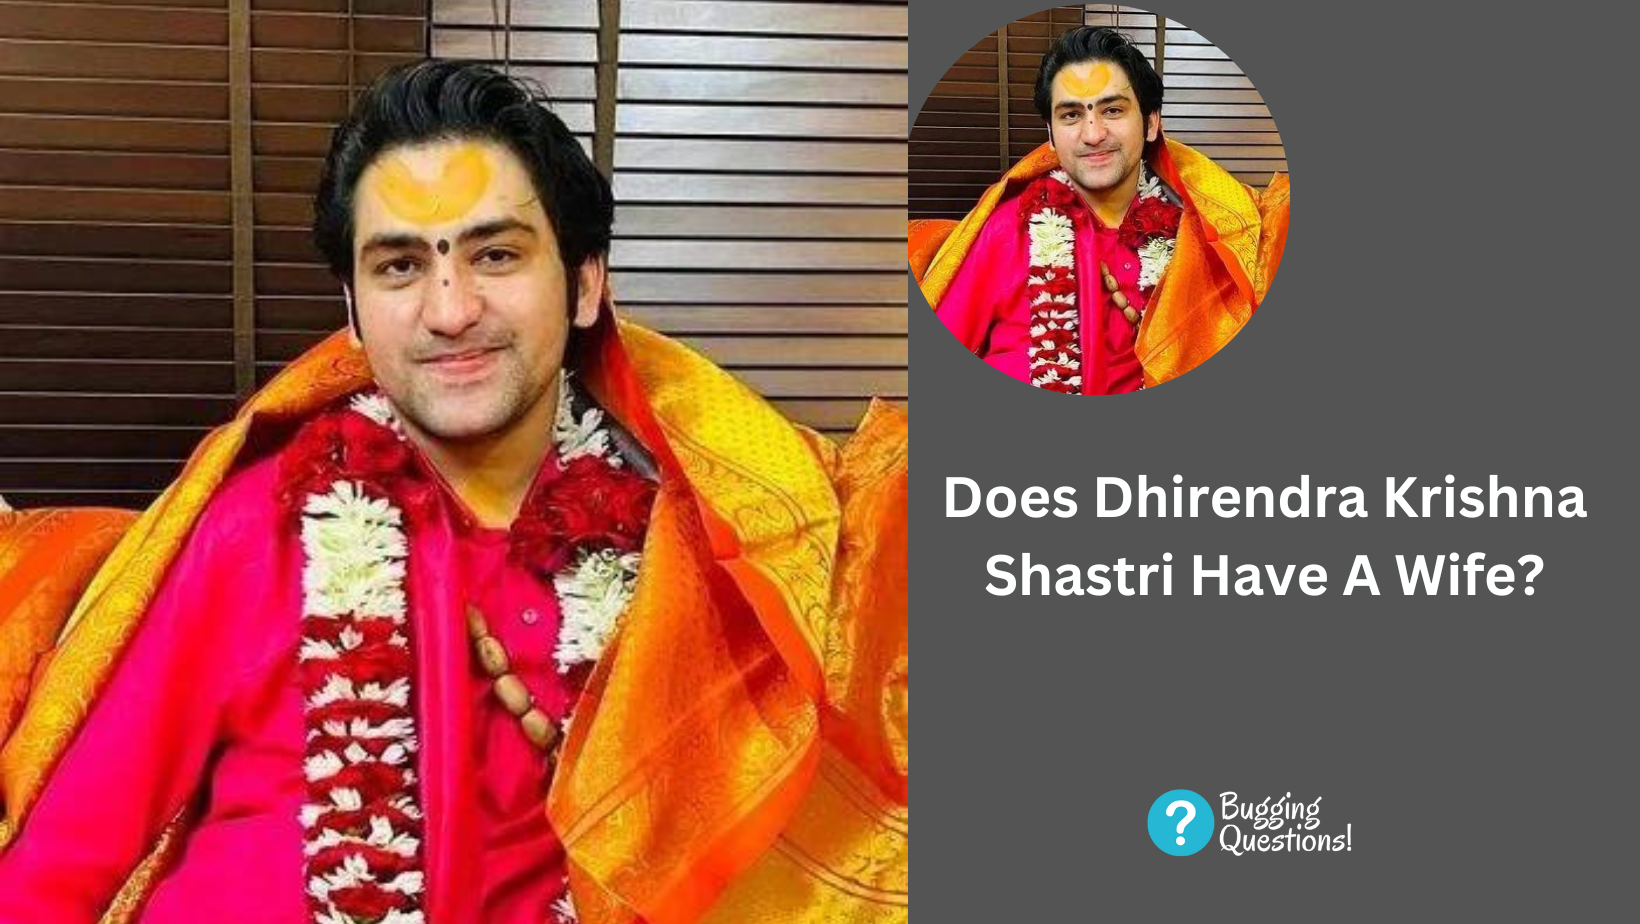 Does Dhirendra Krishna Shastri Have A Wife?